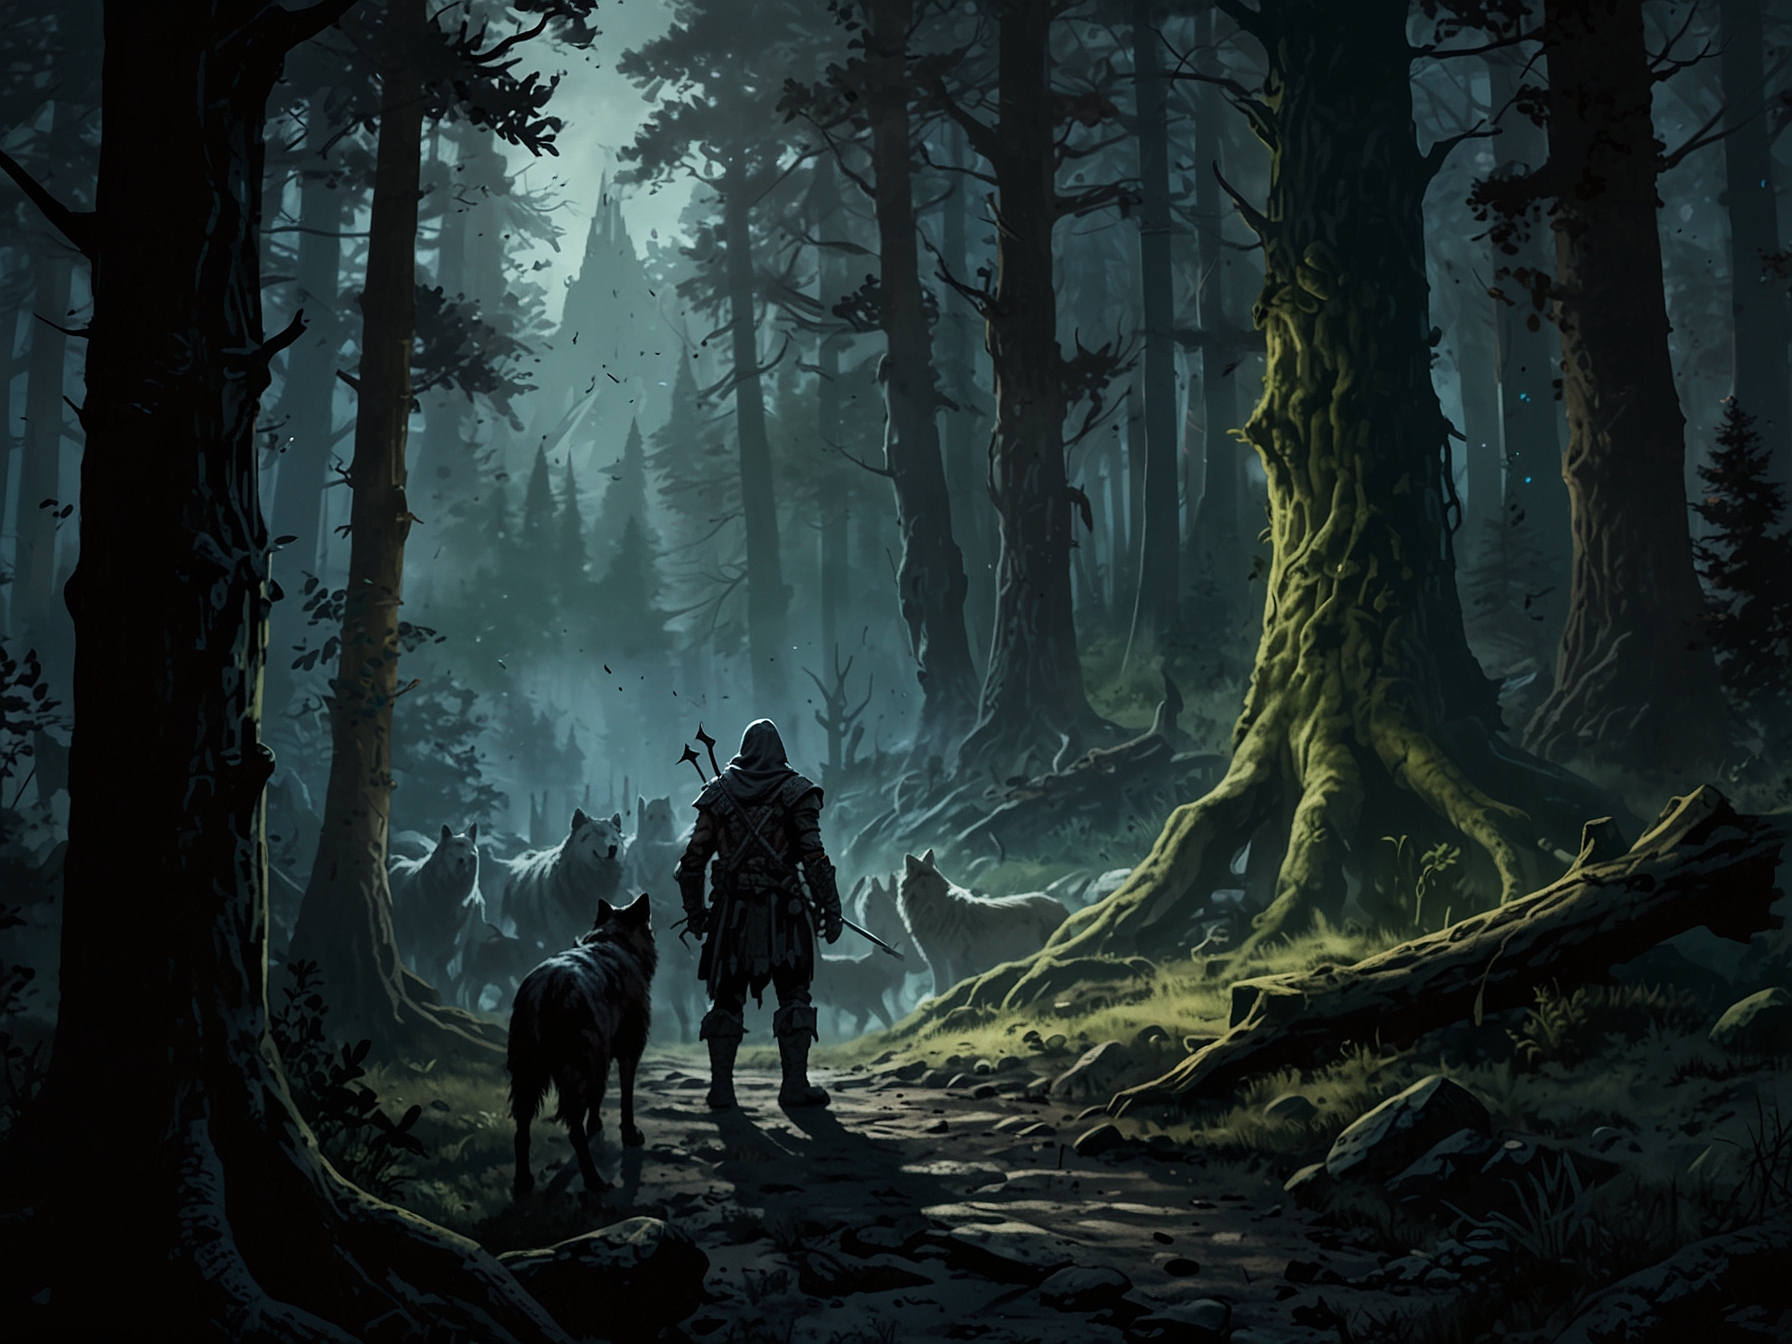 An adventurer stands in the mystical Mistwood region, facing off against spectral knights and wolves in the Howling Wood as they search for Count Ymir to initiate the quest.